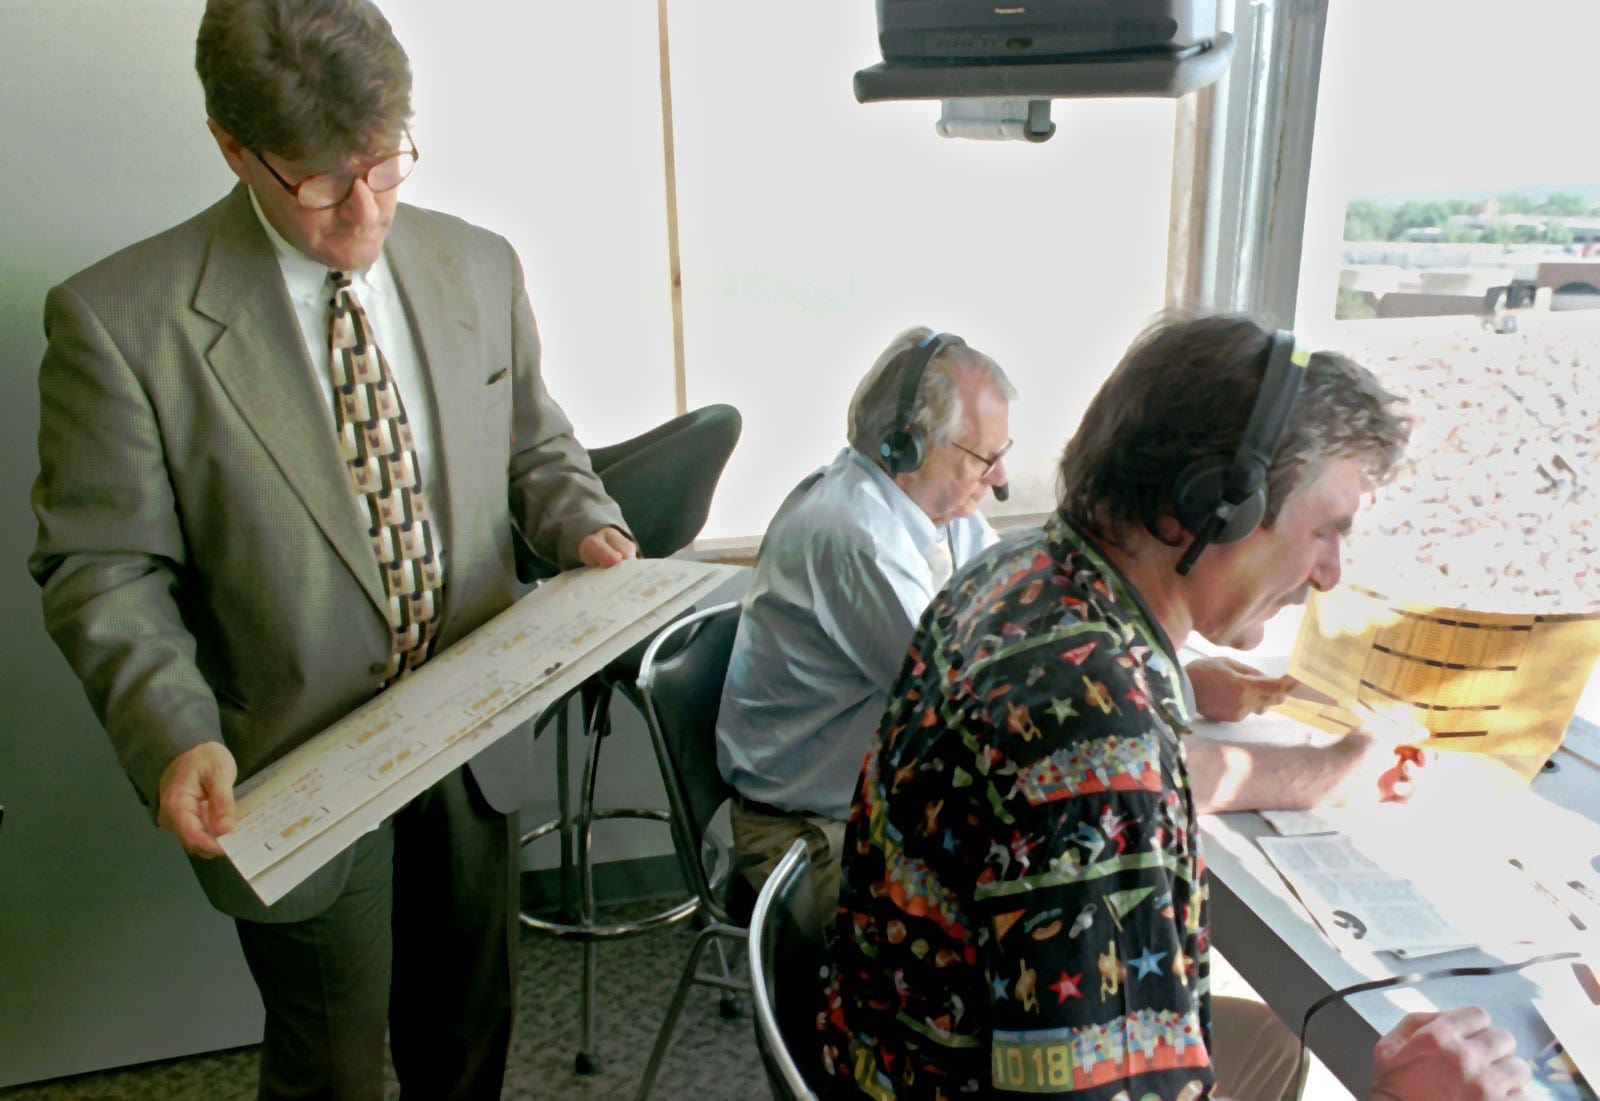 From 1997: It was Jim Zabel, background, who asked Ed Podolak, left, to become a commentator for Iowa football in 1982.